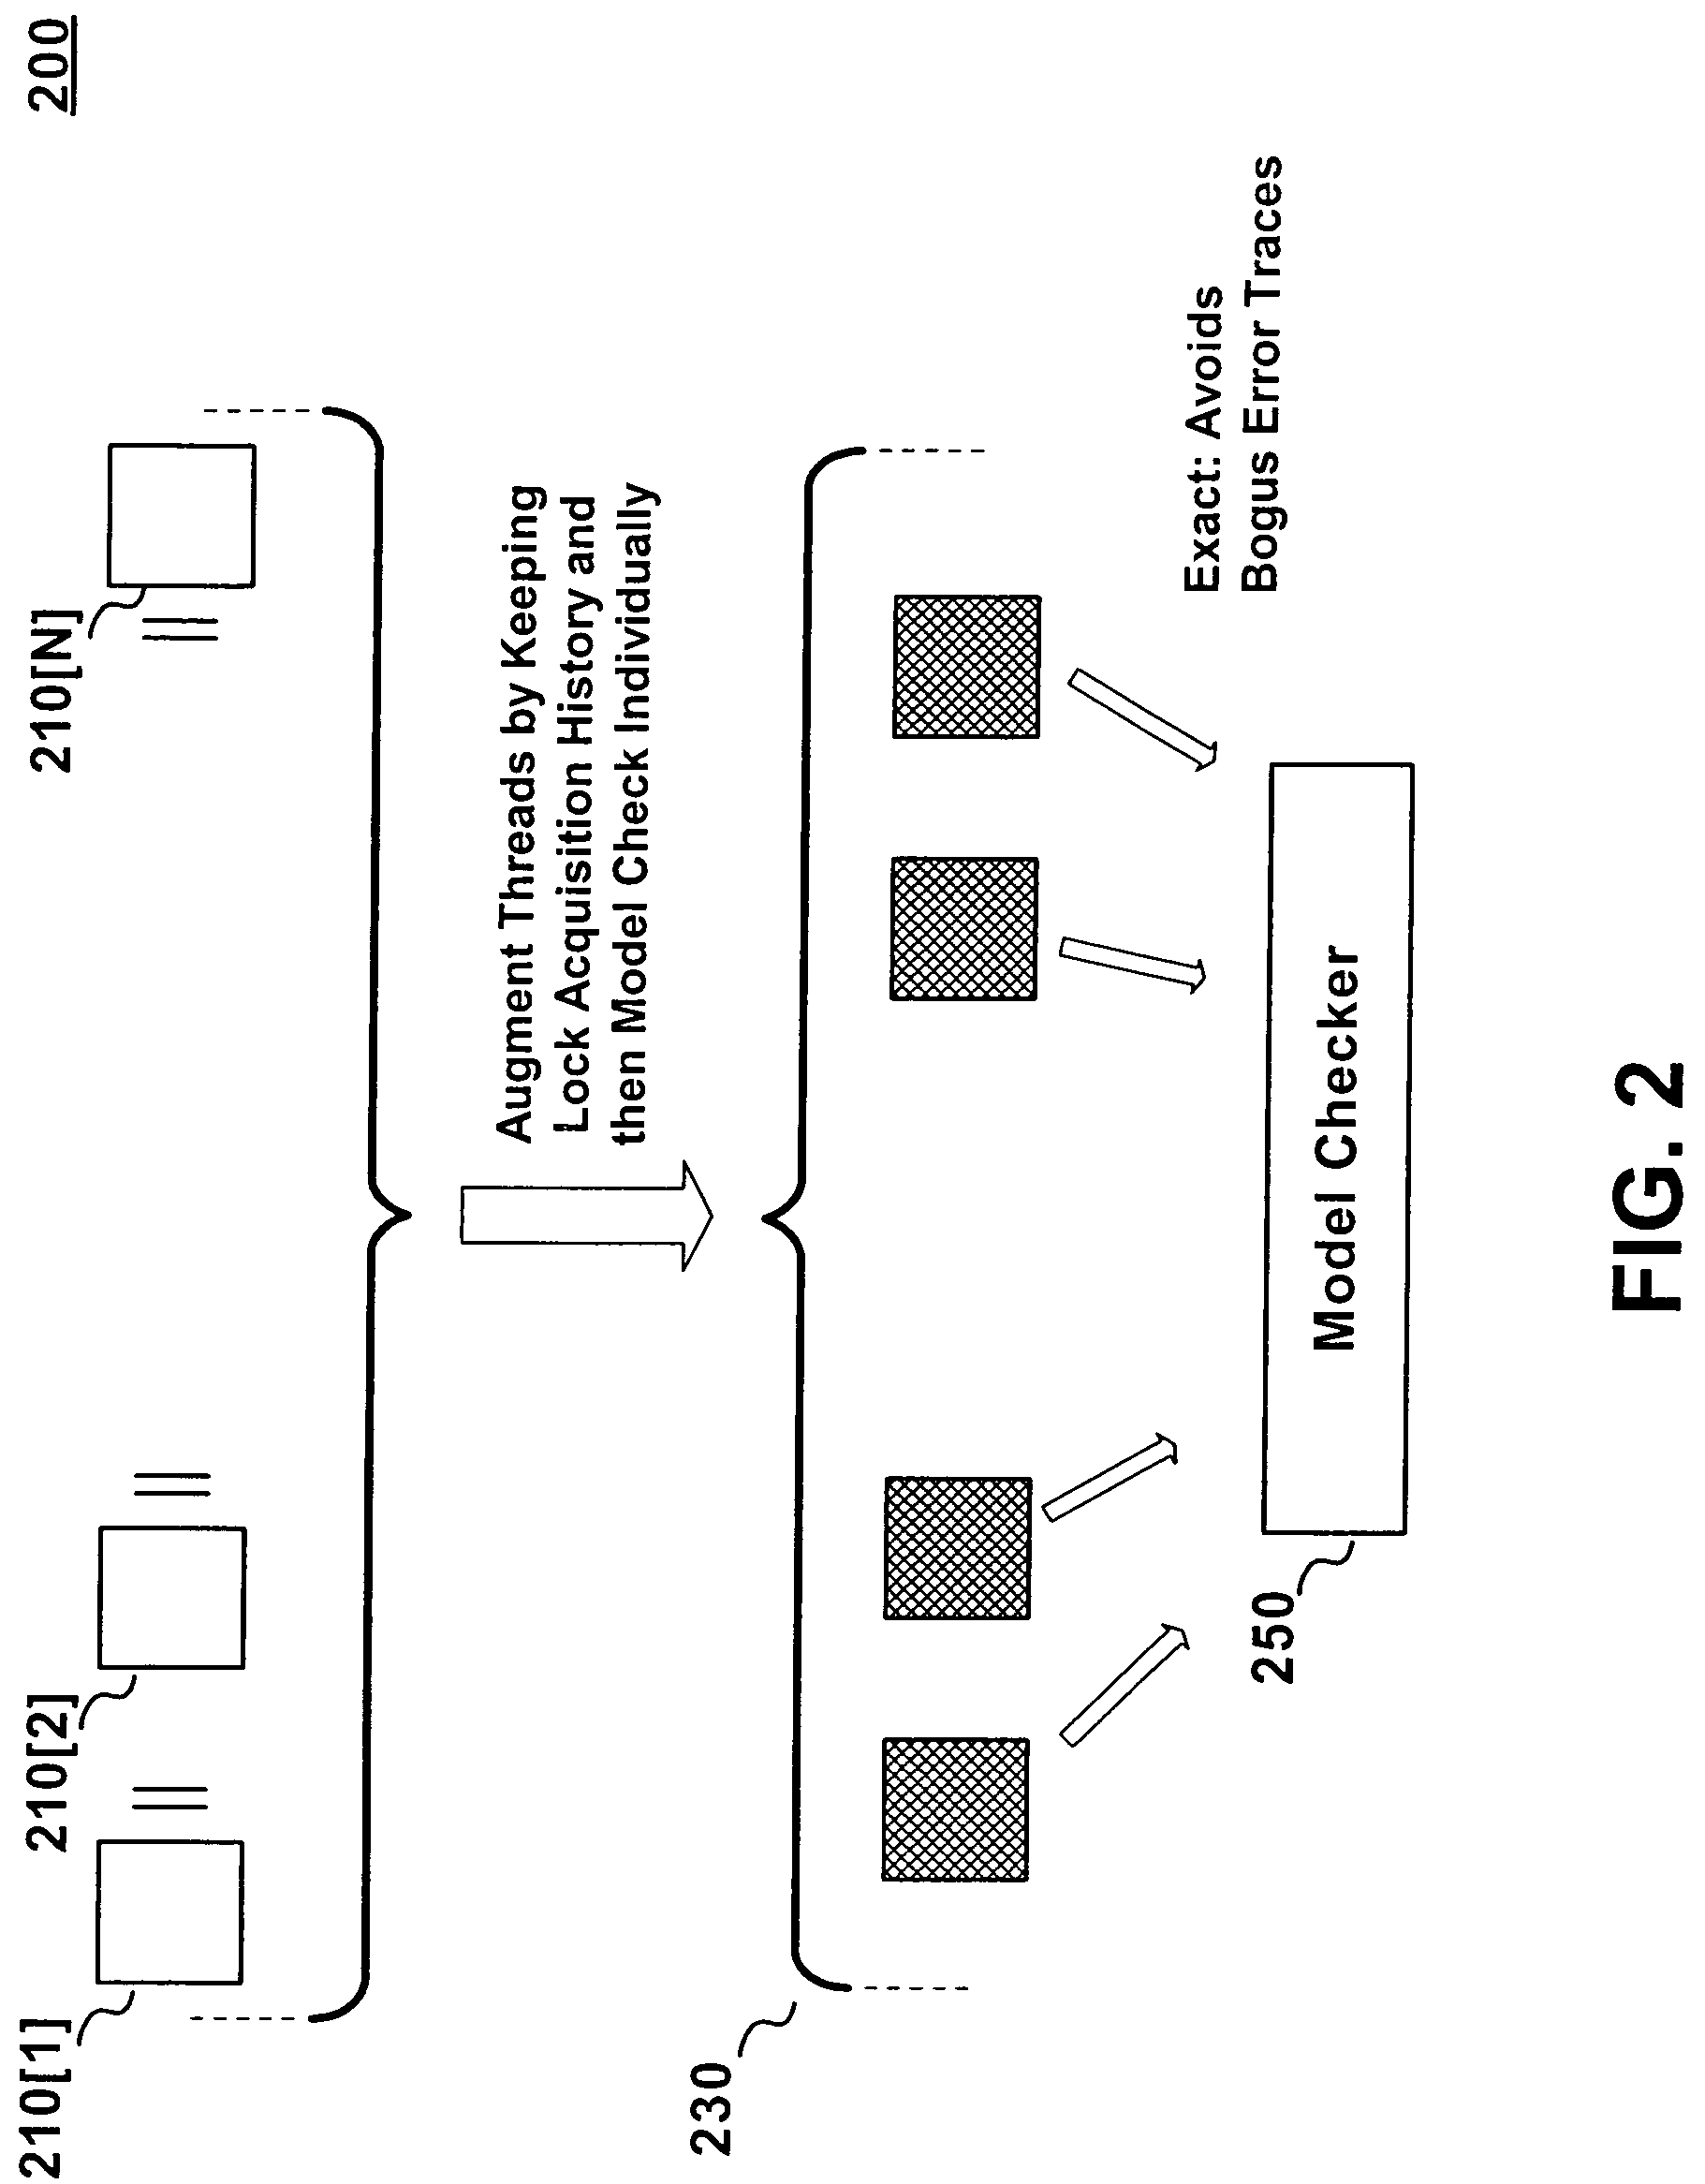 Method for the static analysis of concurrent multi-threaded software